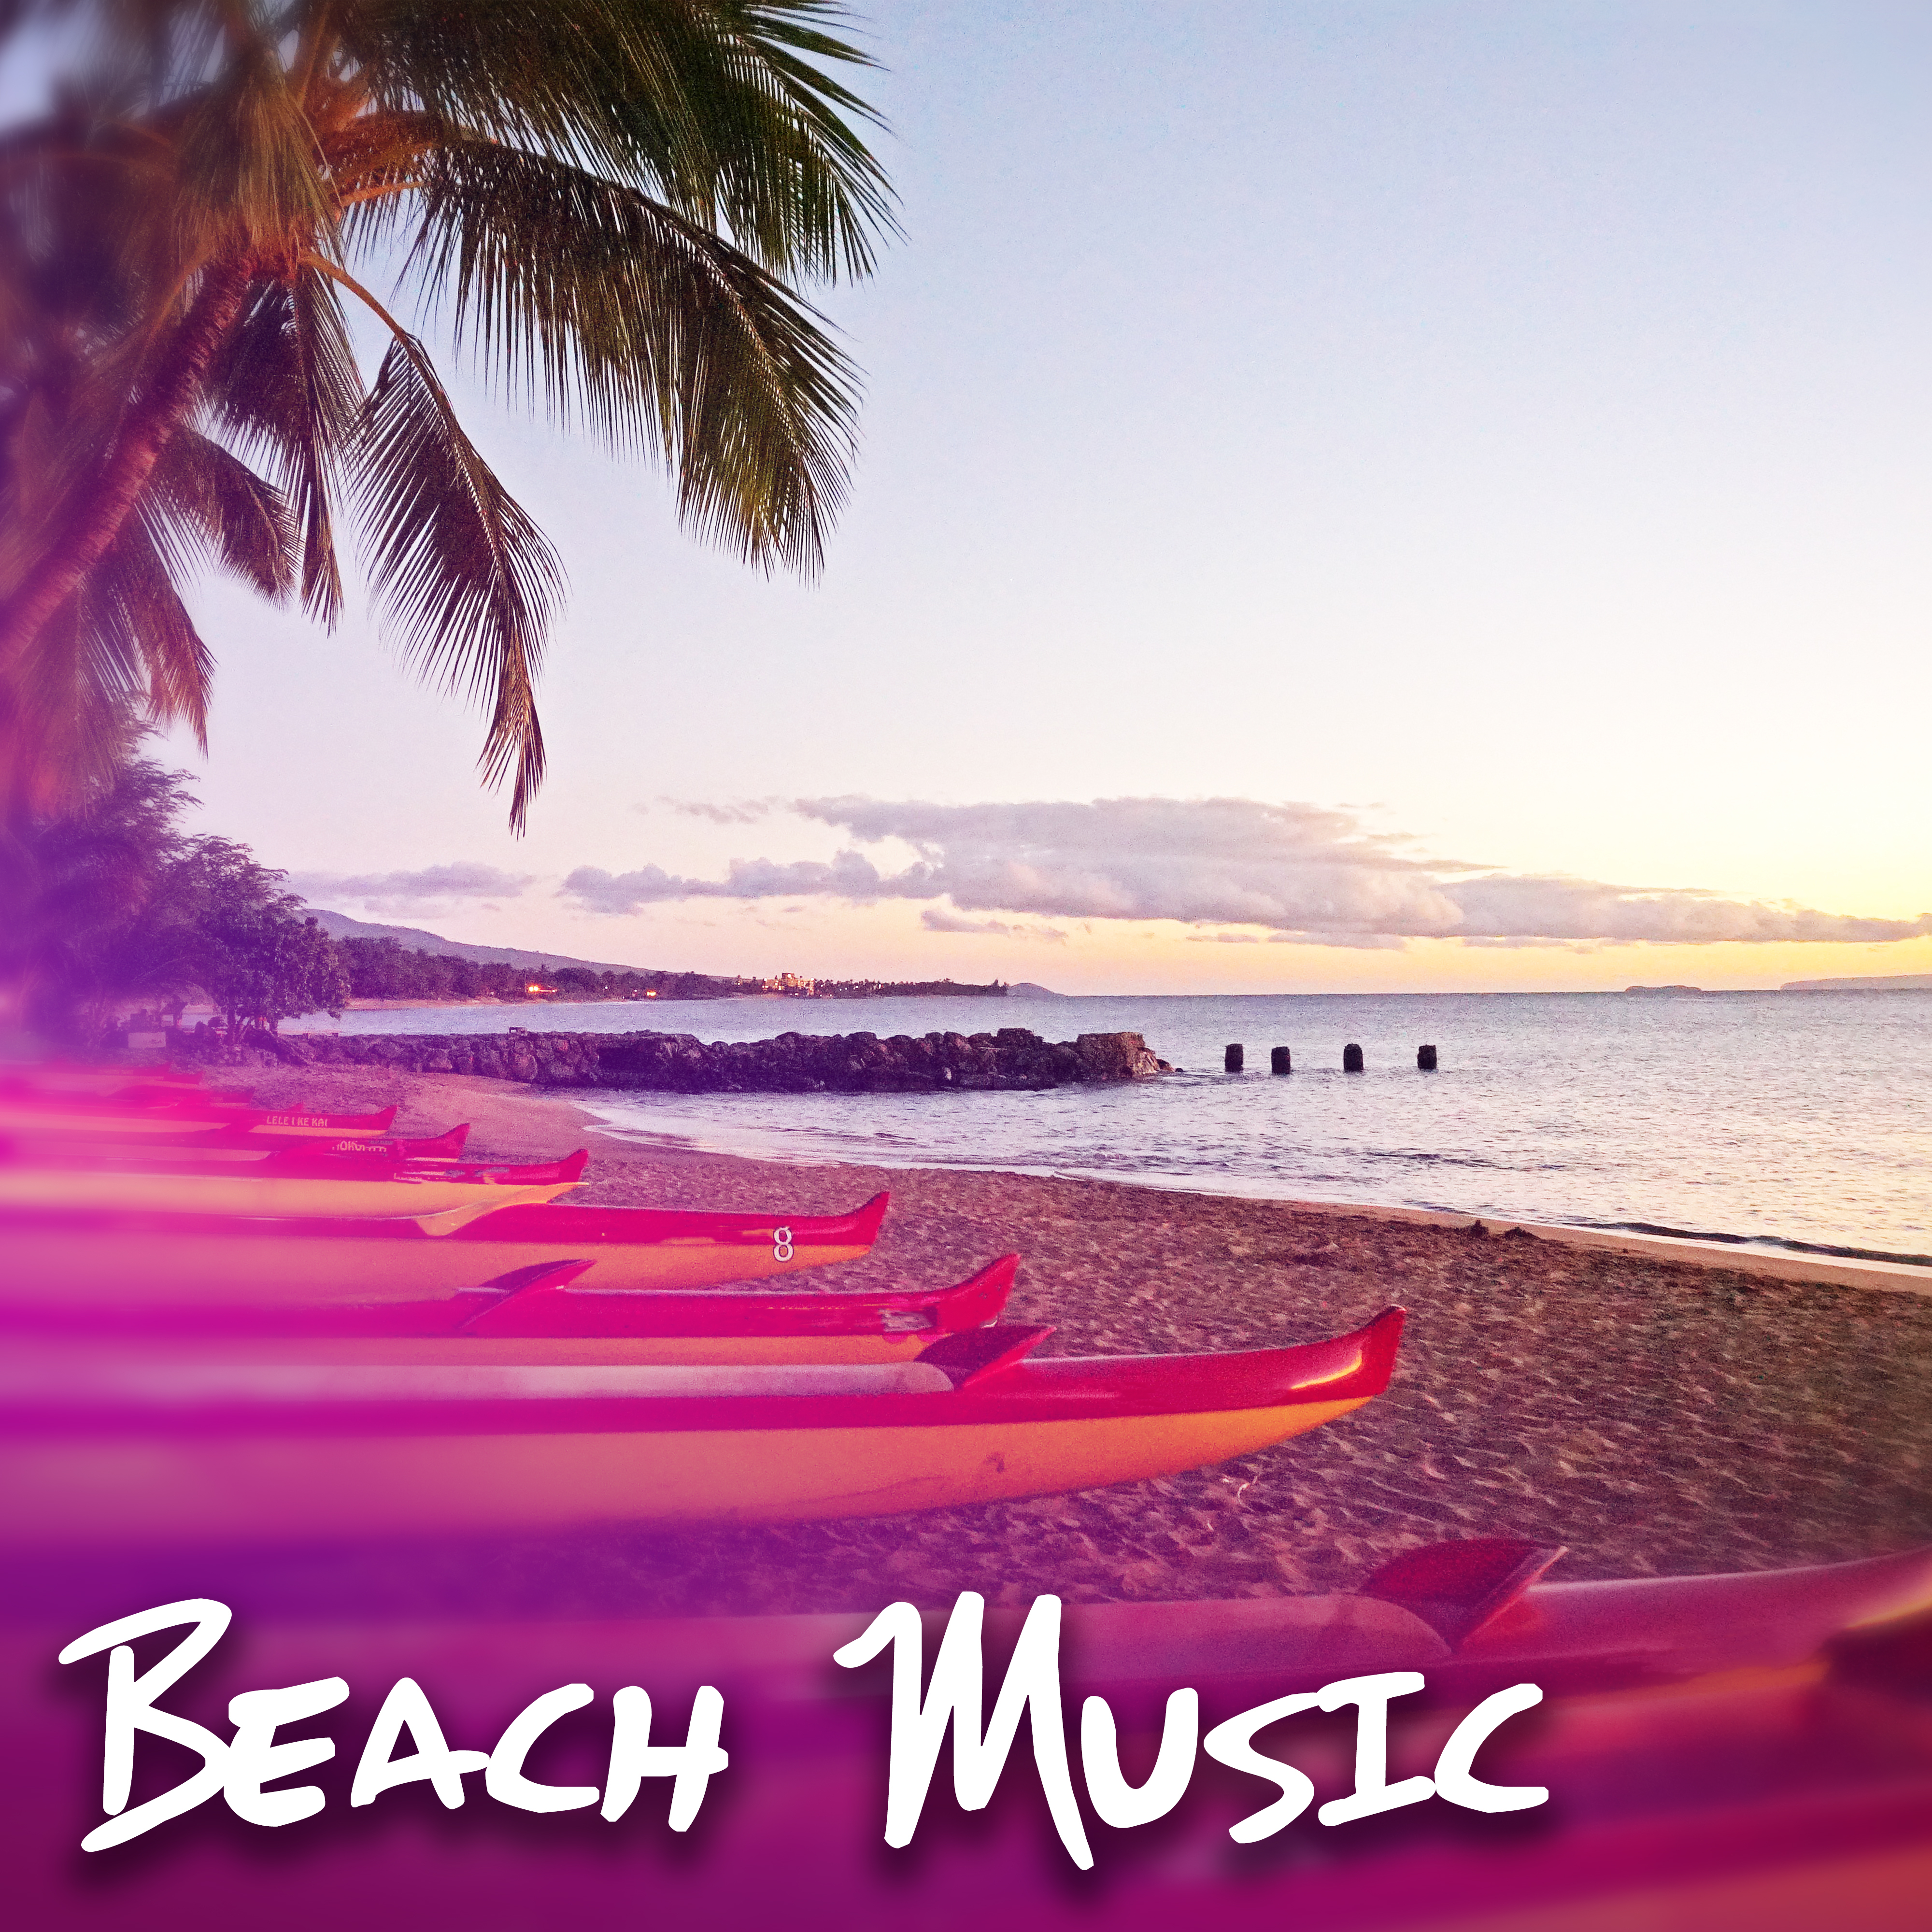 Beach Music  Tropical Chill Out, Sunny Relaxation, Ibiza Lounge, Summer Chill, Relaxing Waves, Holiday Chill Out Music